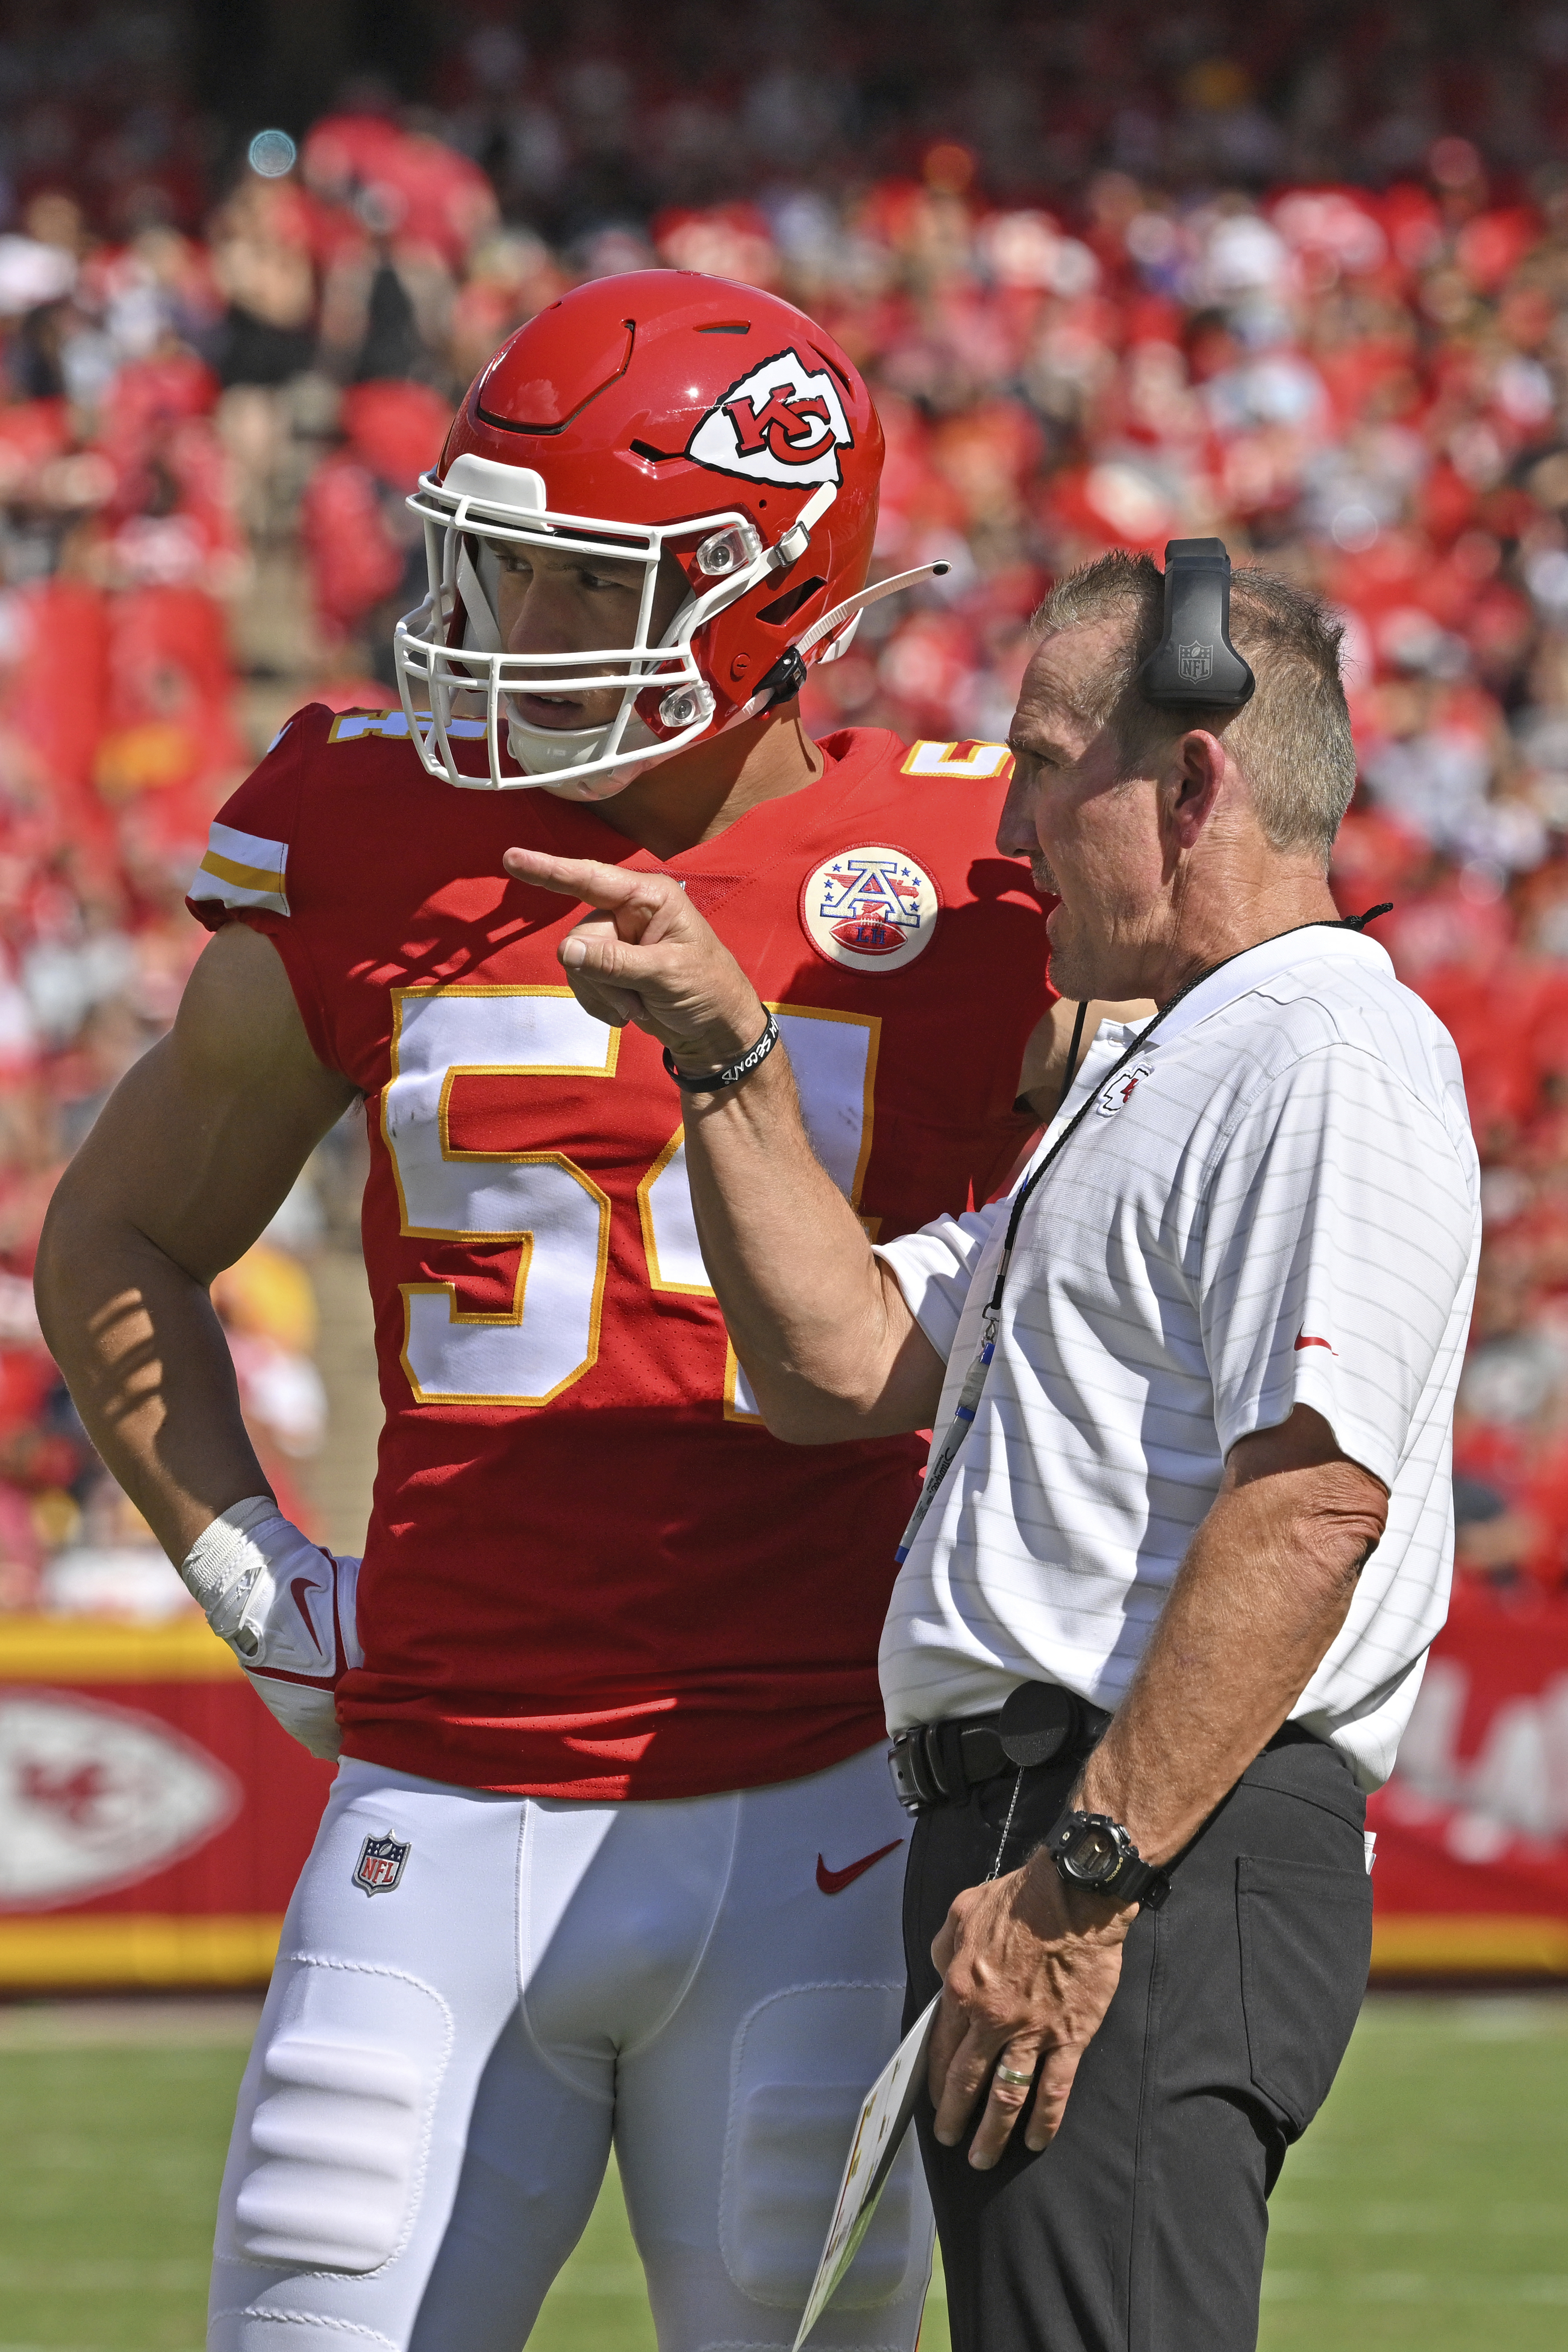 Steve Spagnuolo on Chiefs’ defensive identity without Chris Jones